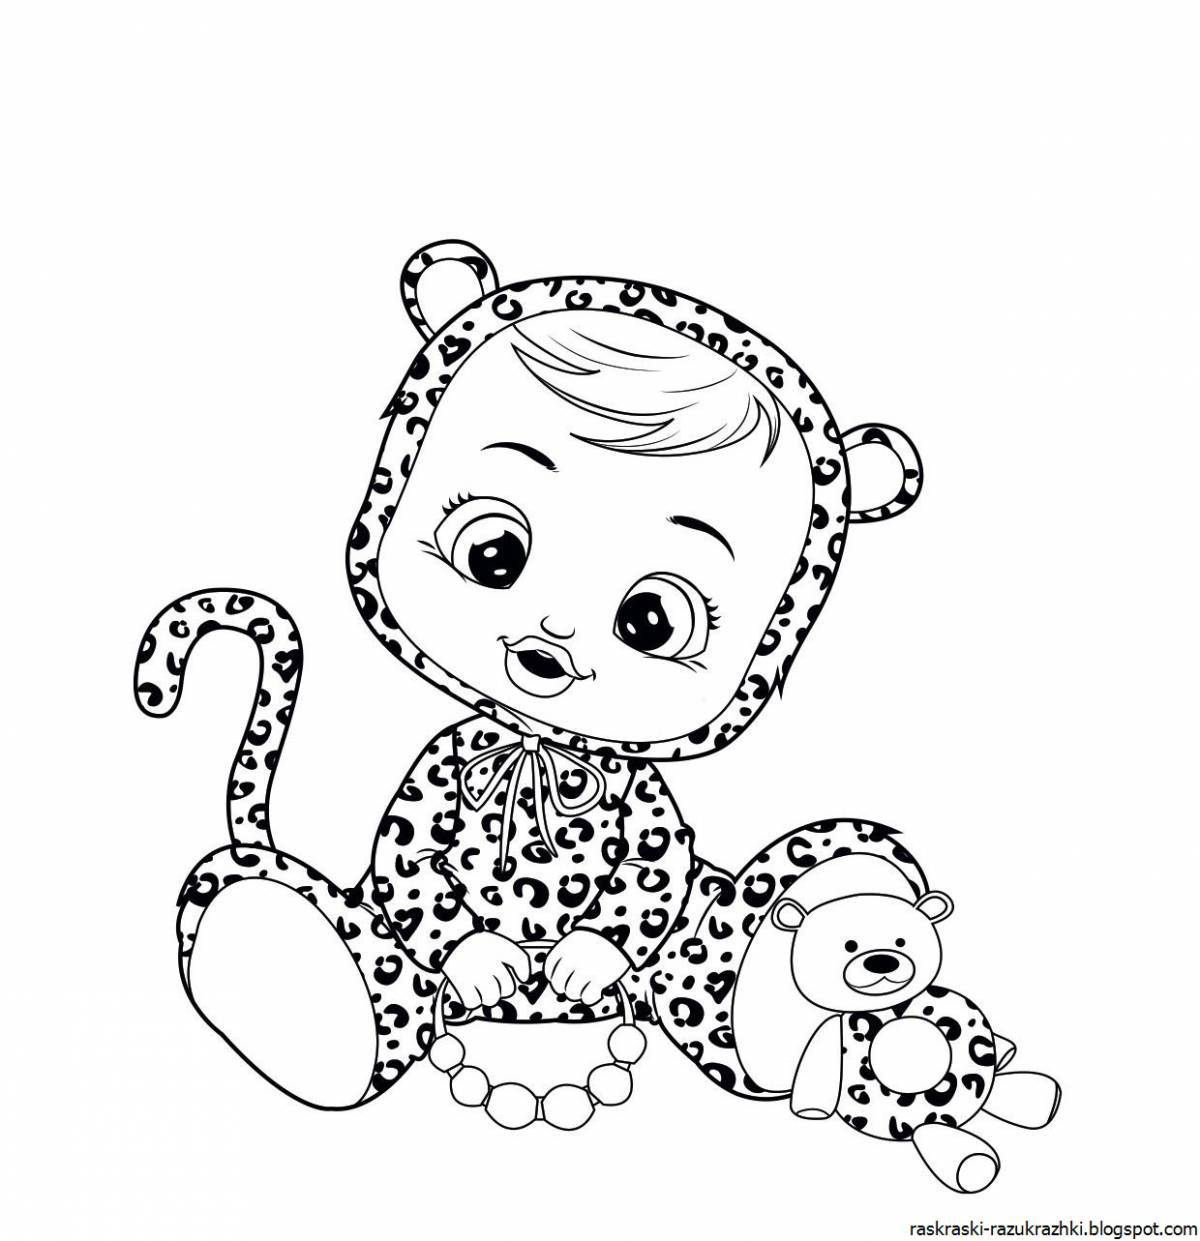 The edge of the magical babys coloring page